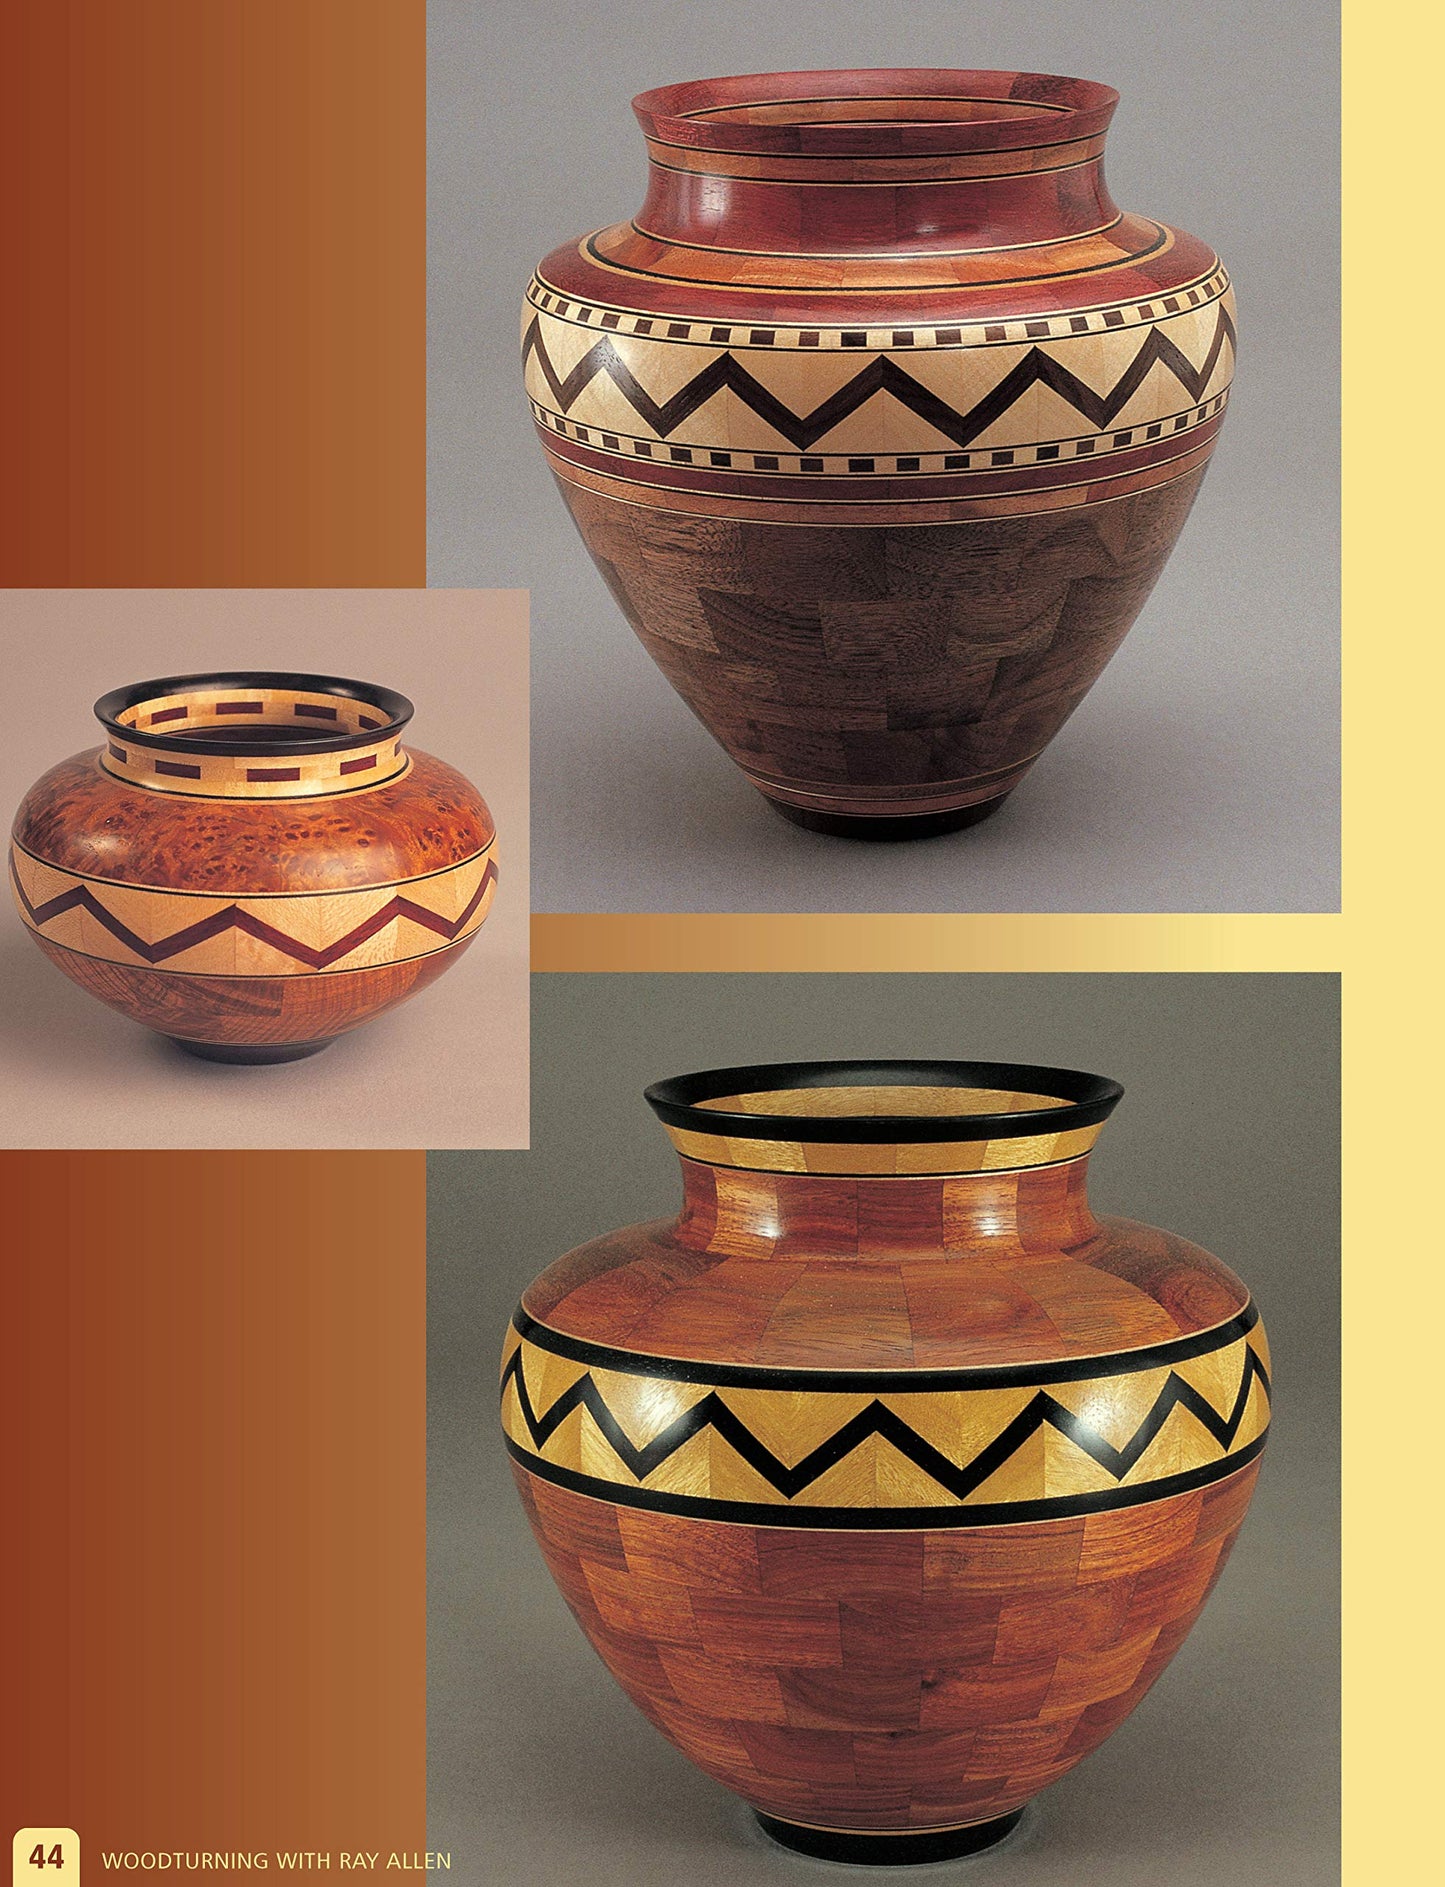 Woodturning with Ray Allen: A Master's Designs & Techniques for Segmented Bowls and Vessels (Fox Chapel Publishing) 11 Plans and a Gallery of Work